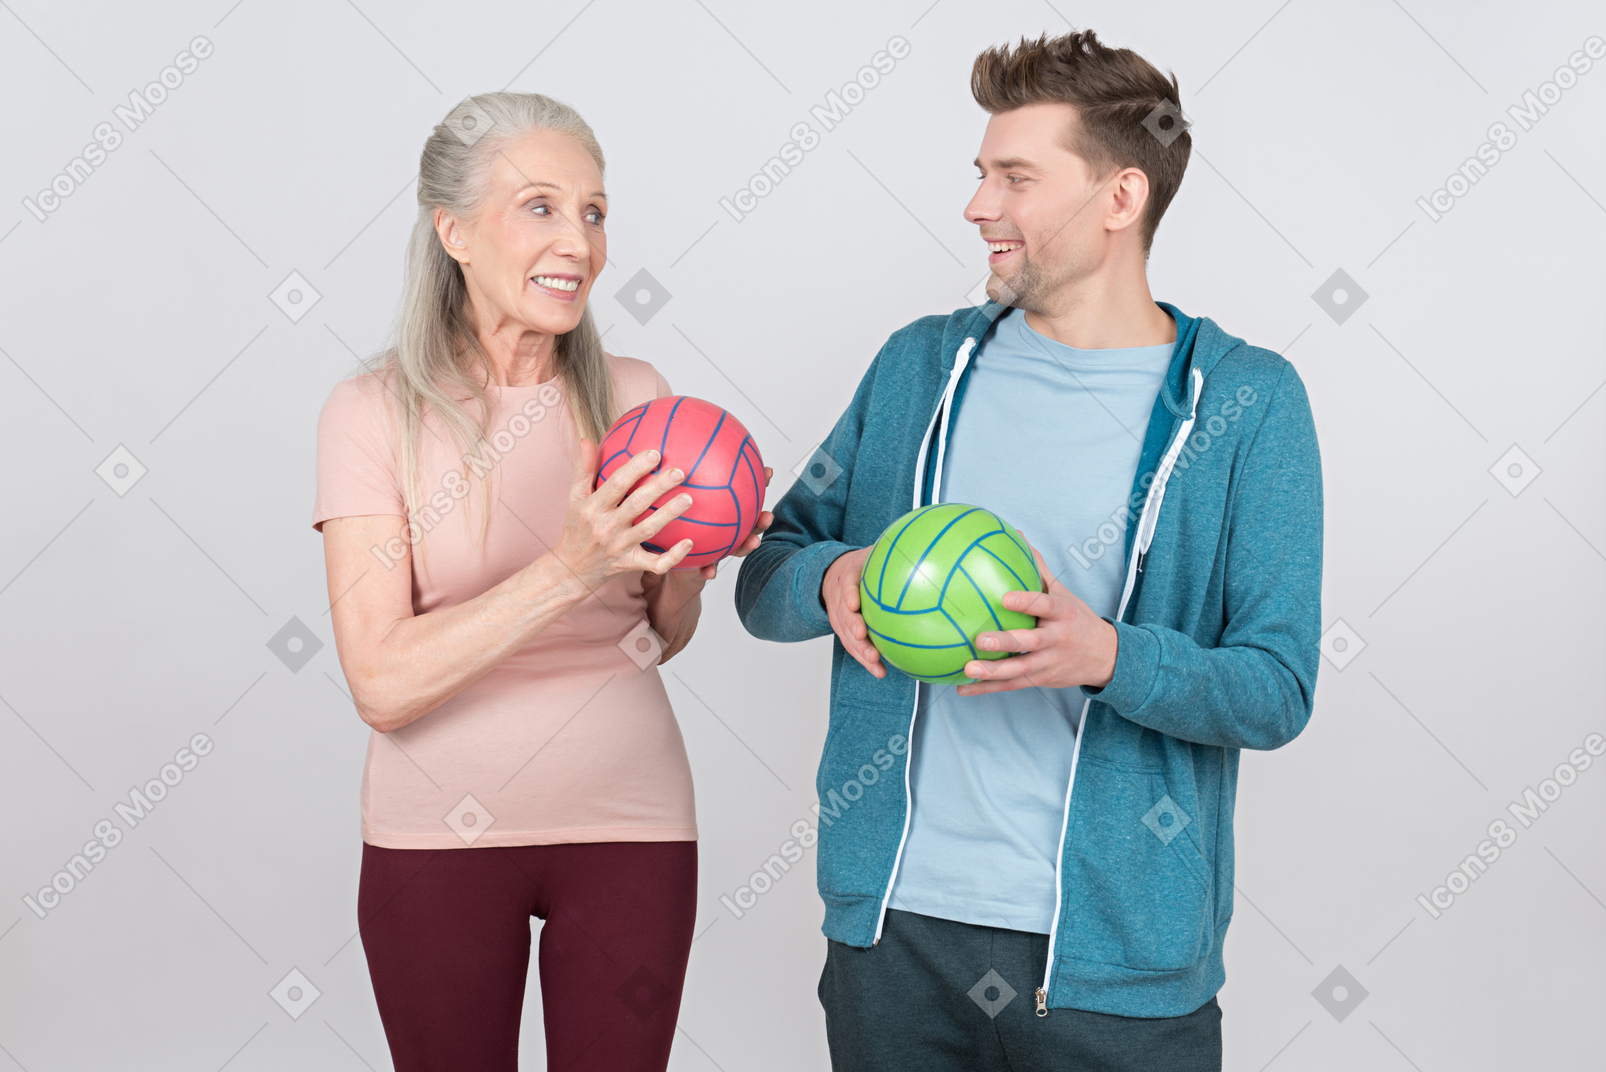 Smiling old woman and young guy holding colorful balls